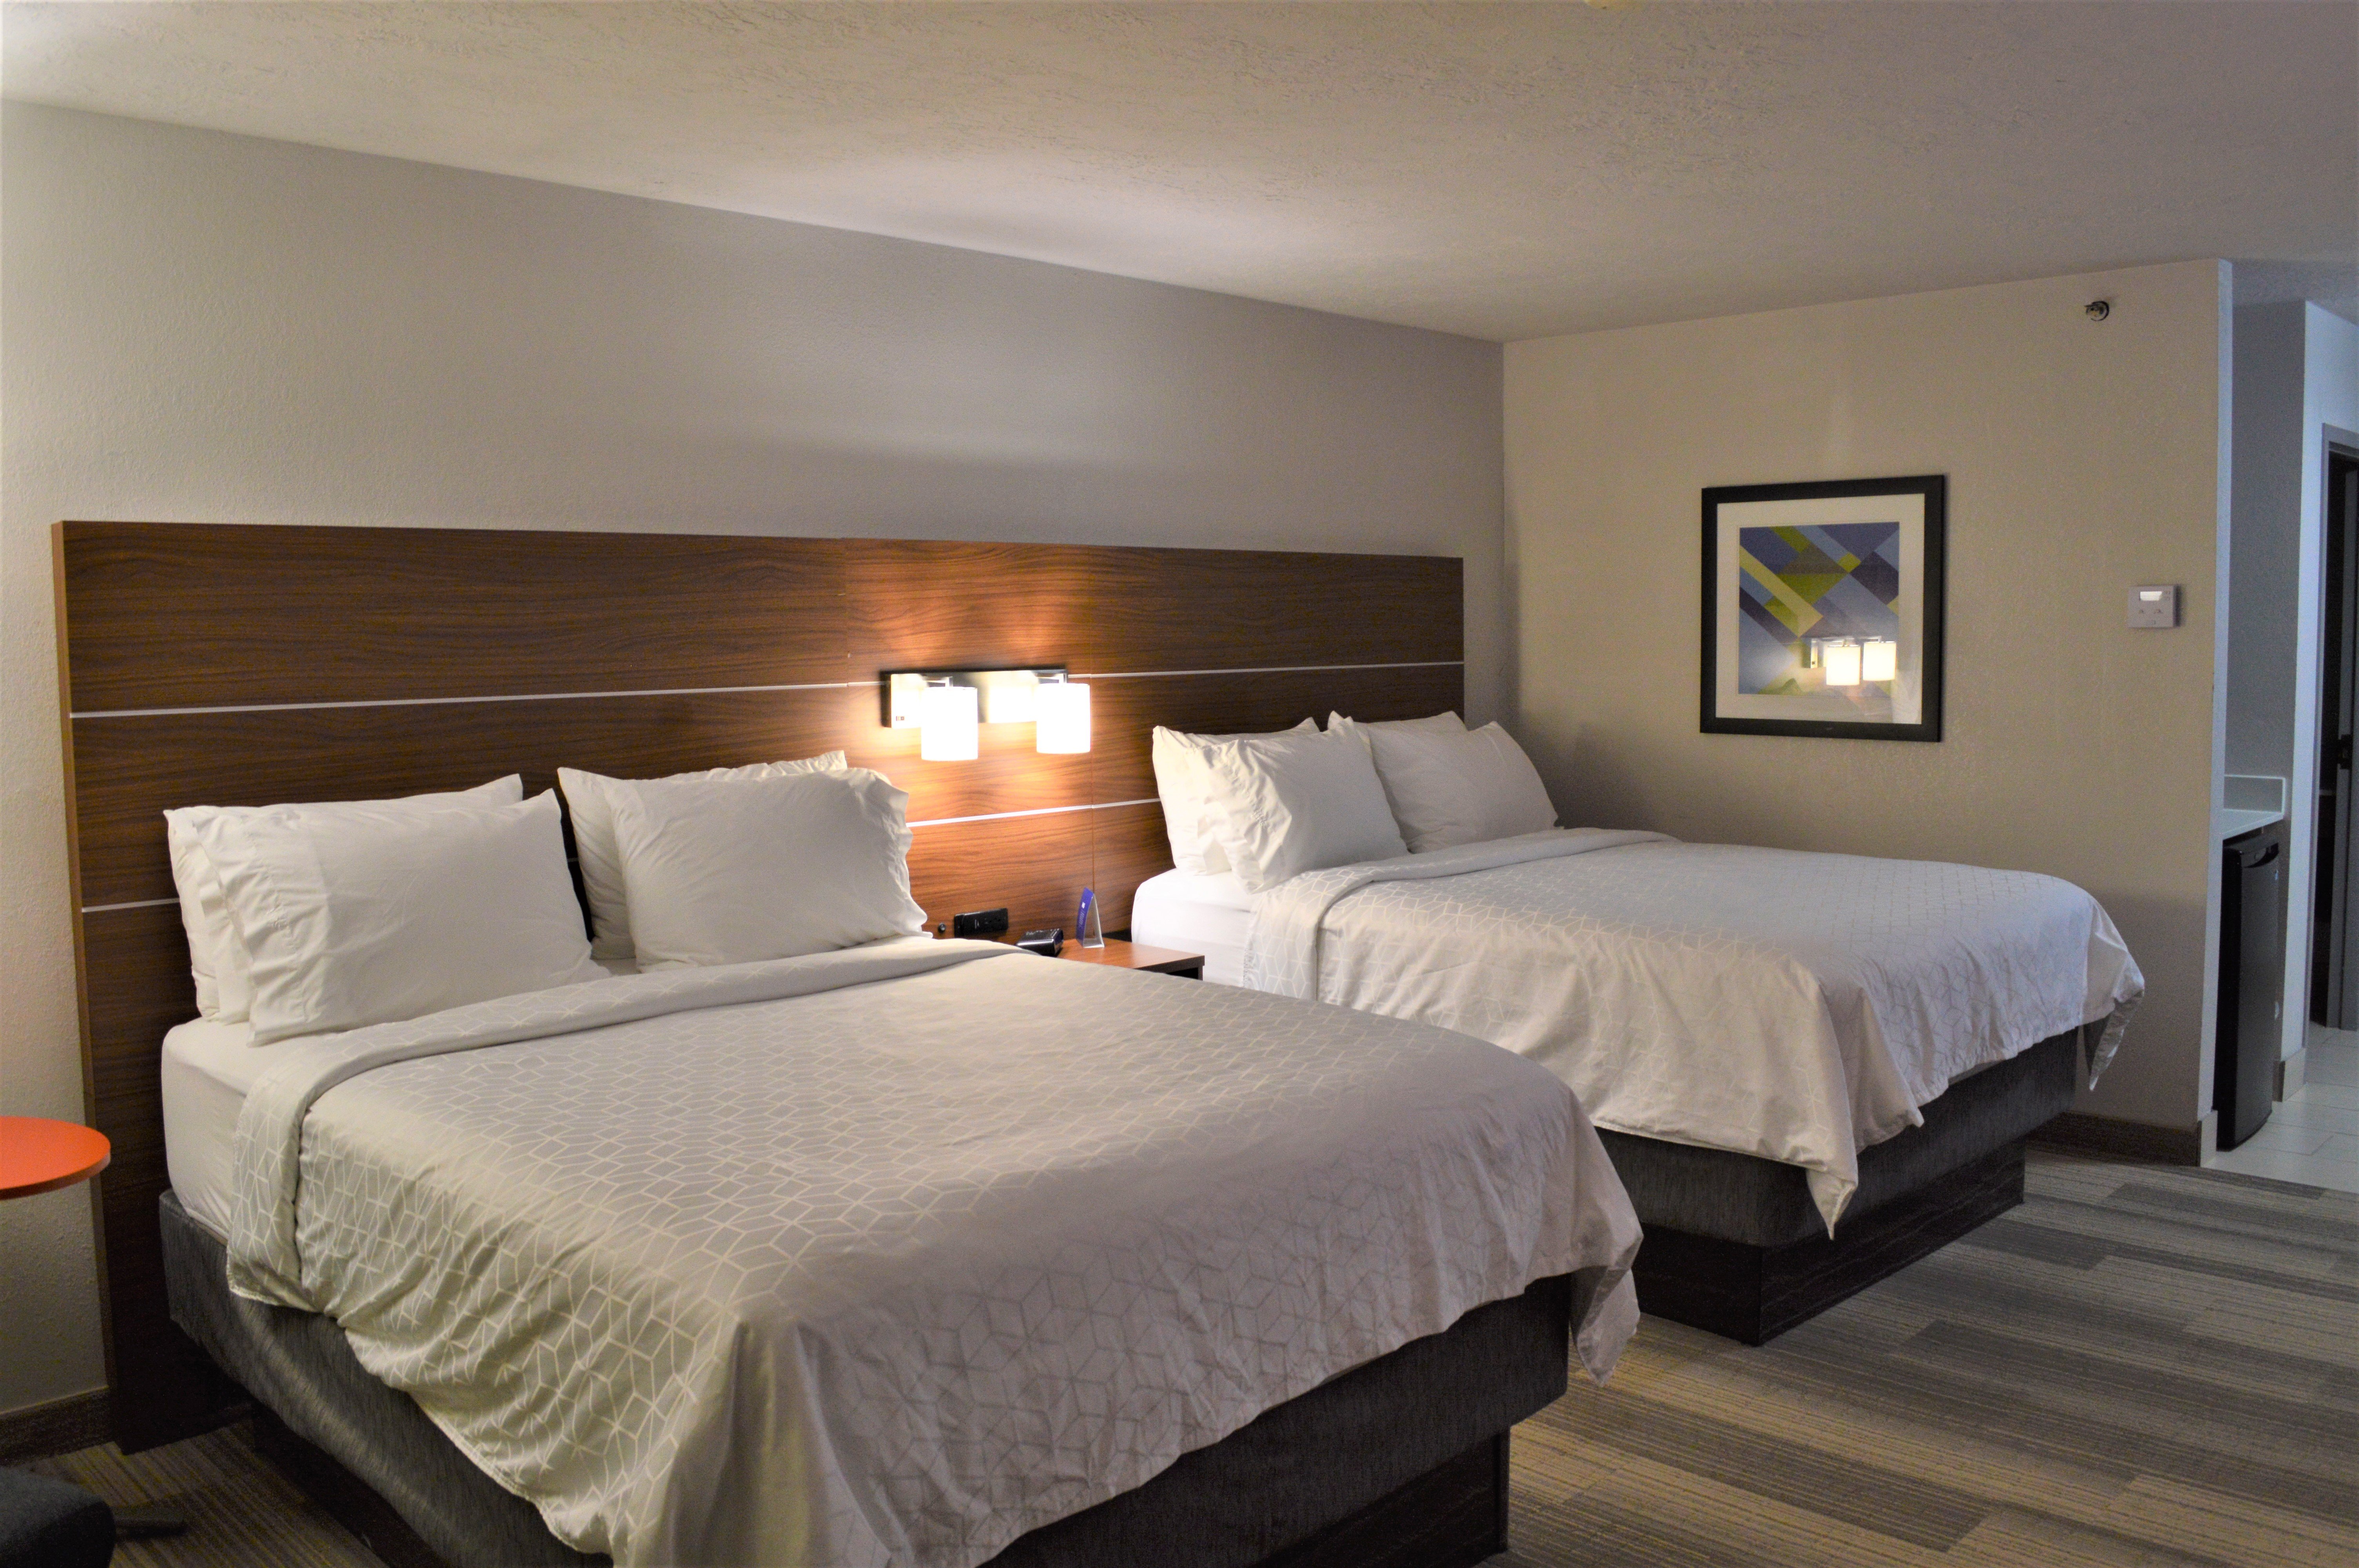 Our spacious ADA rooms feature total wheelchair accessibility.